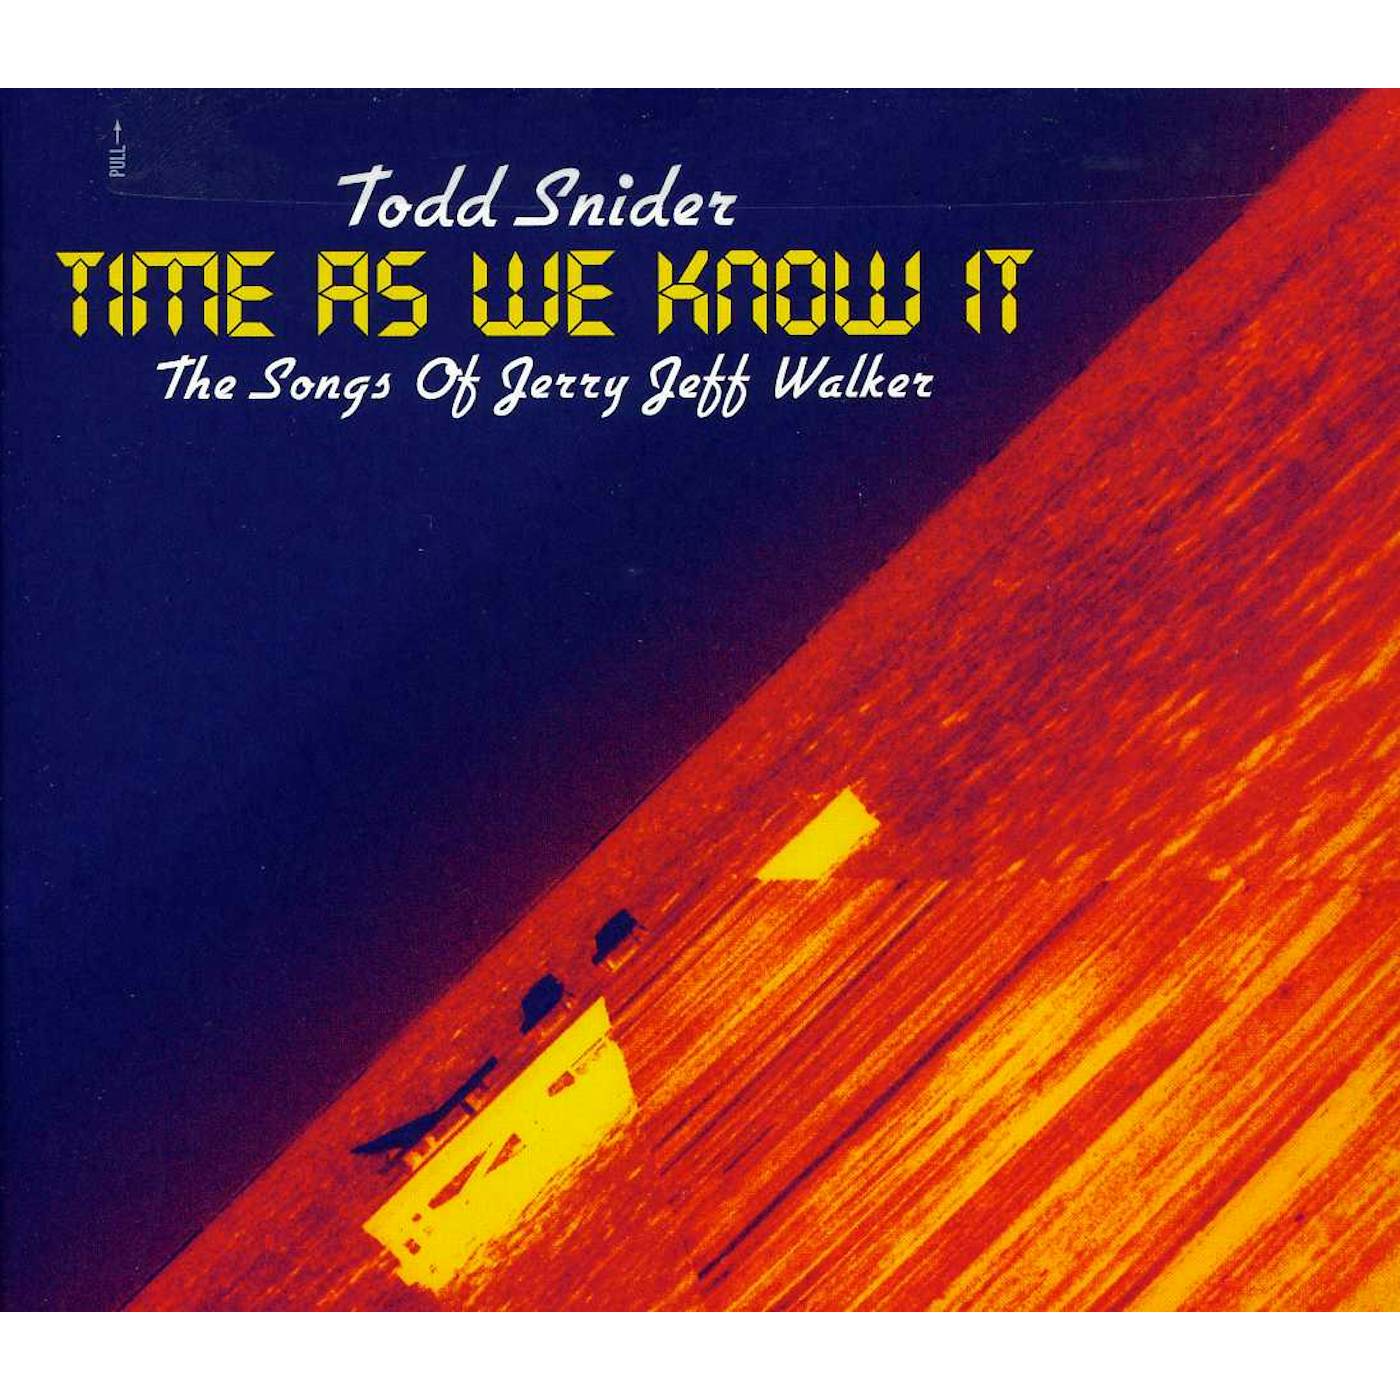 Todd Snider TIME AS WE KNOW IT: SONGS OF JERRY JEFF WALKER CD